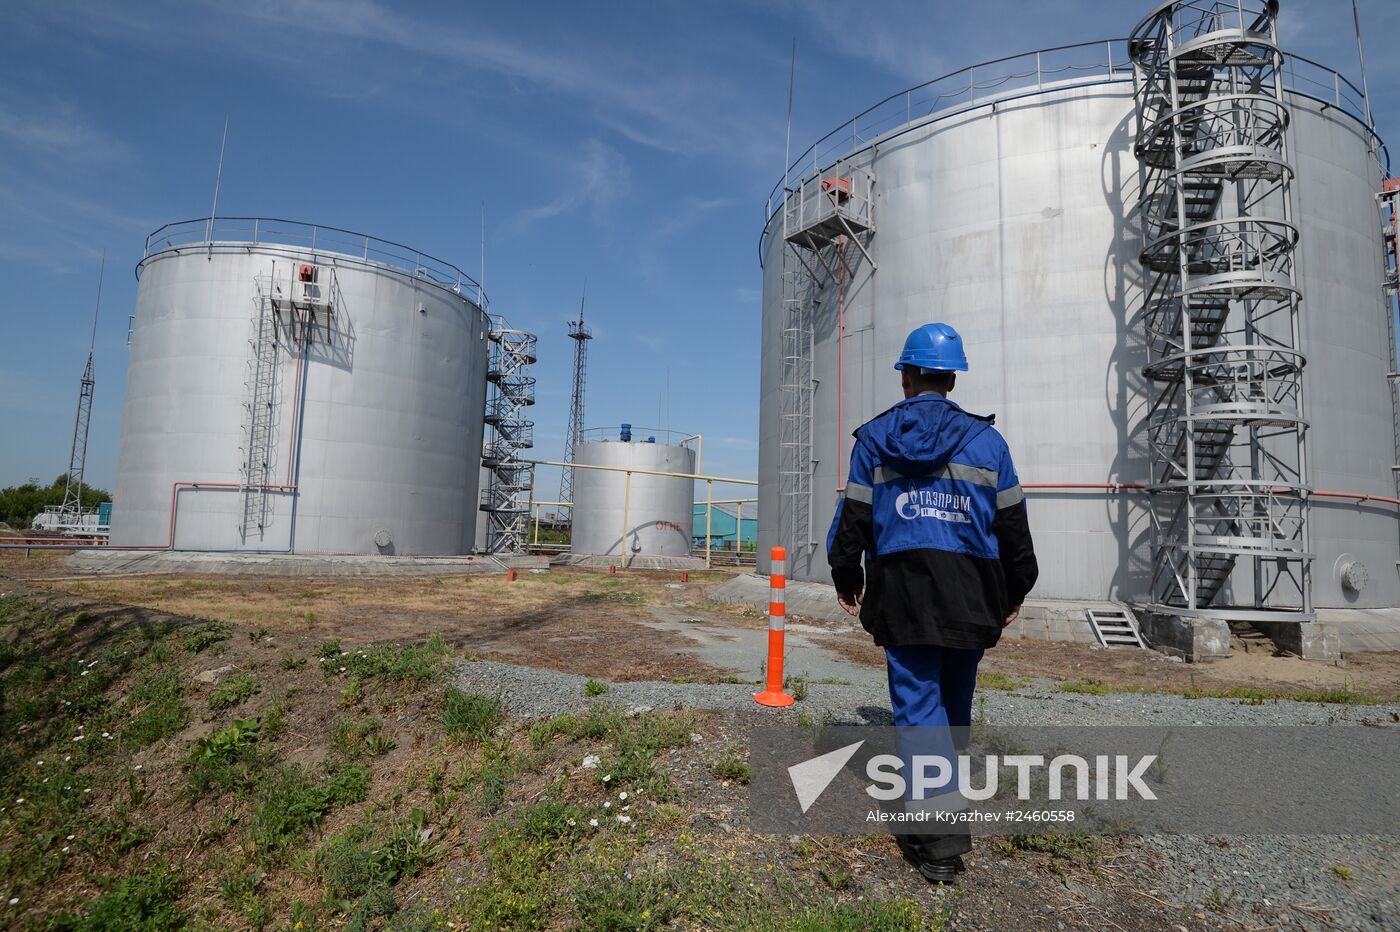 Quality control of Gazprom-Neft's oil products